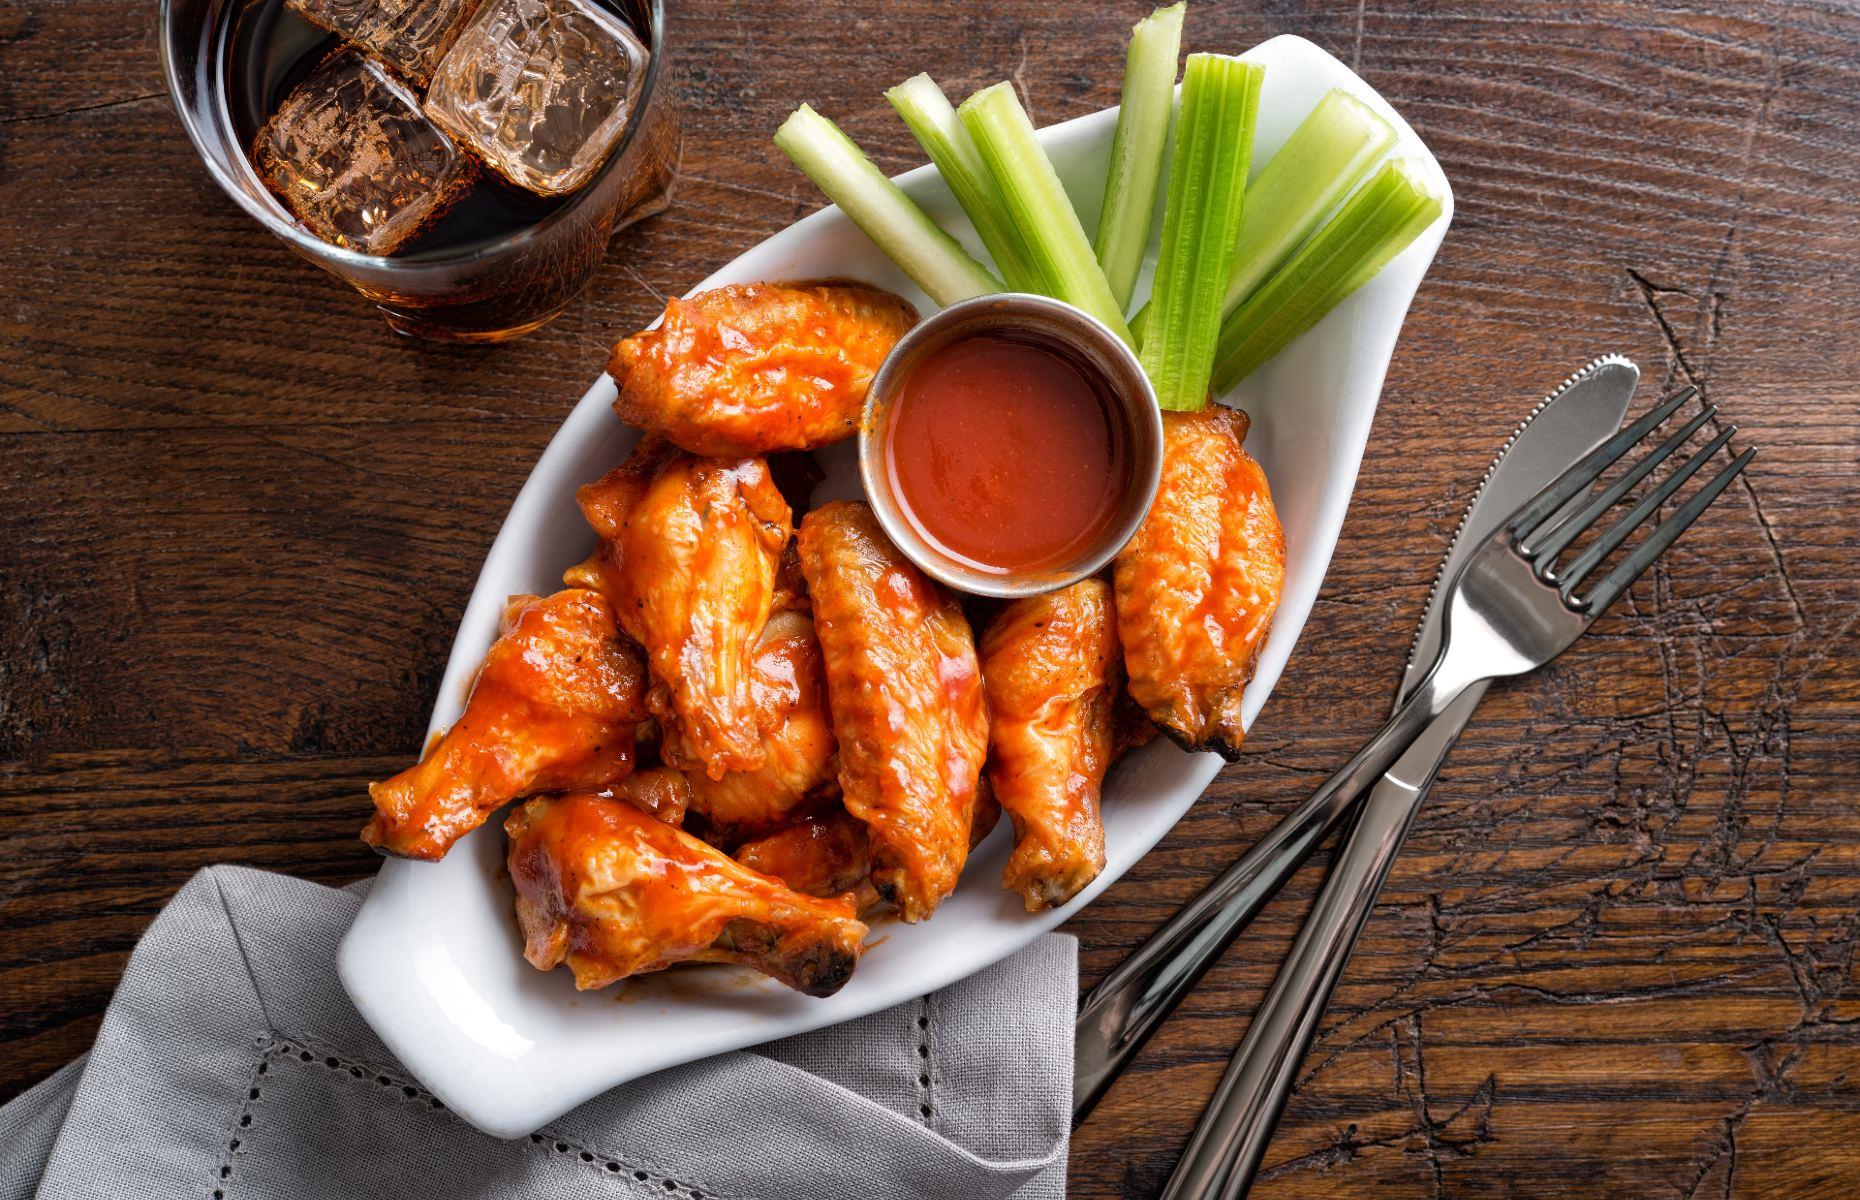 <p>As one of the most beloved dishes of the American cuisine, no US bucket list can be complete without eating Buffalo wings in its birthplace, Buffalo, New York. This sports bar classic gets its name from the Buffalo sauce in which the chicken wings are tossed in. One of the best ways to indulge in this fiery American dish is to take on the<a href="https://www.visitbuffaloniagara.com/crawl/buffalo-wing-trail/"> Buffalo Wing Trail</a>, which will guide you through 14 of the best Buffalo wings throughout the city.</p>